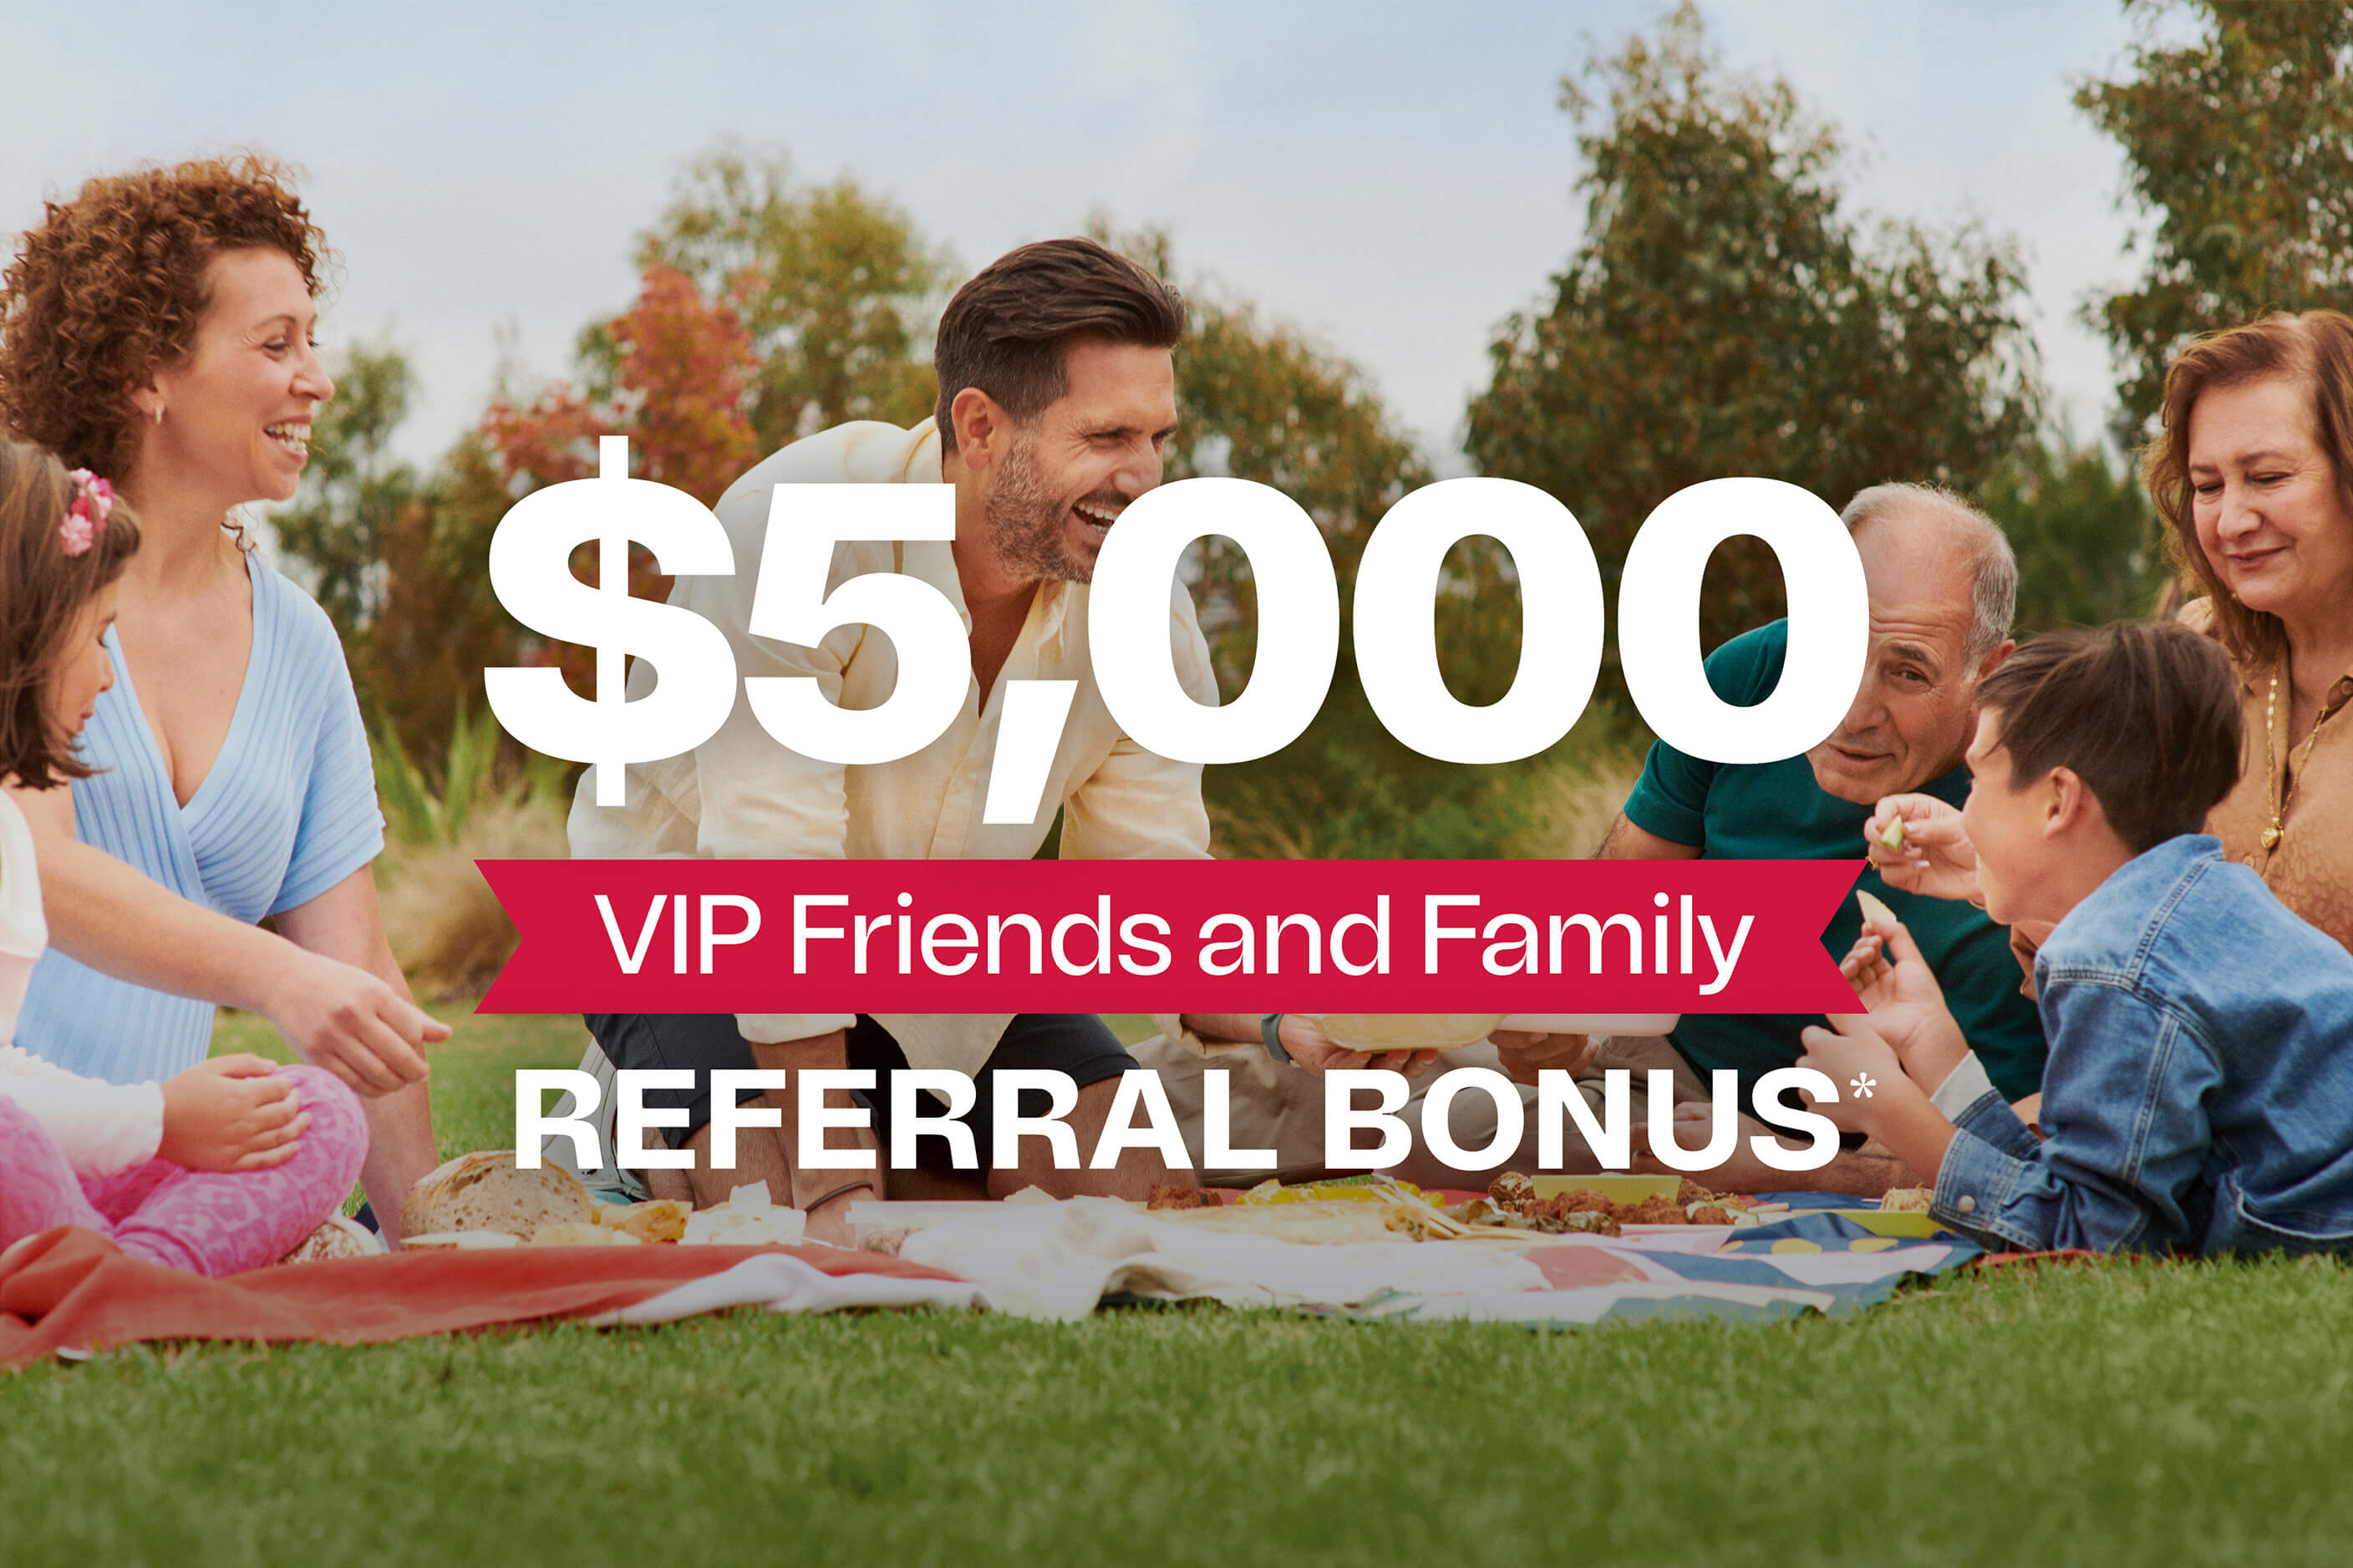 <span class="font-bold">$5,000 VIP Friends and Family Referral Bonus*</span> with Jubilee